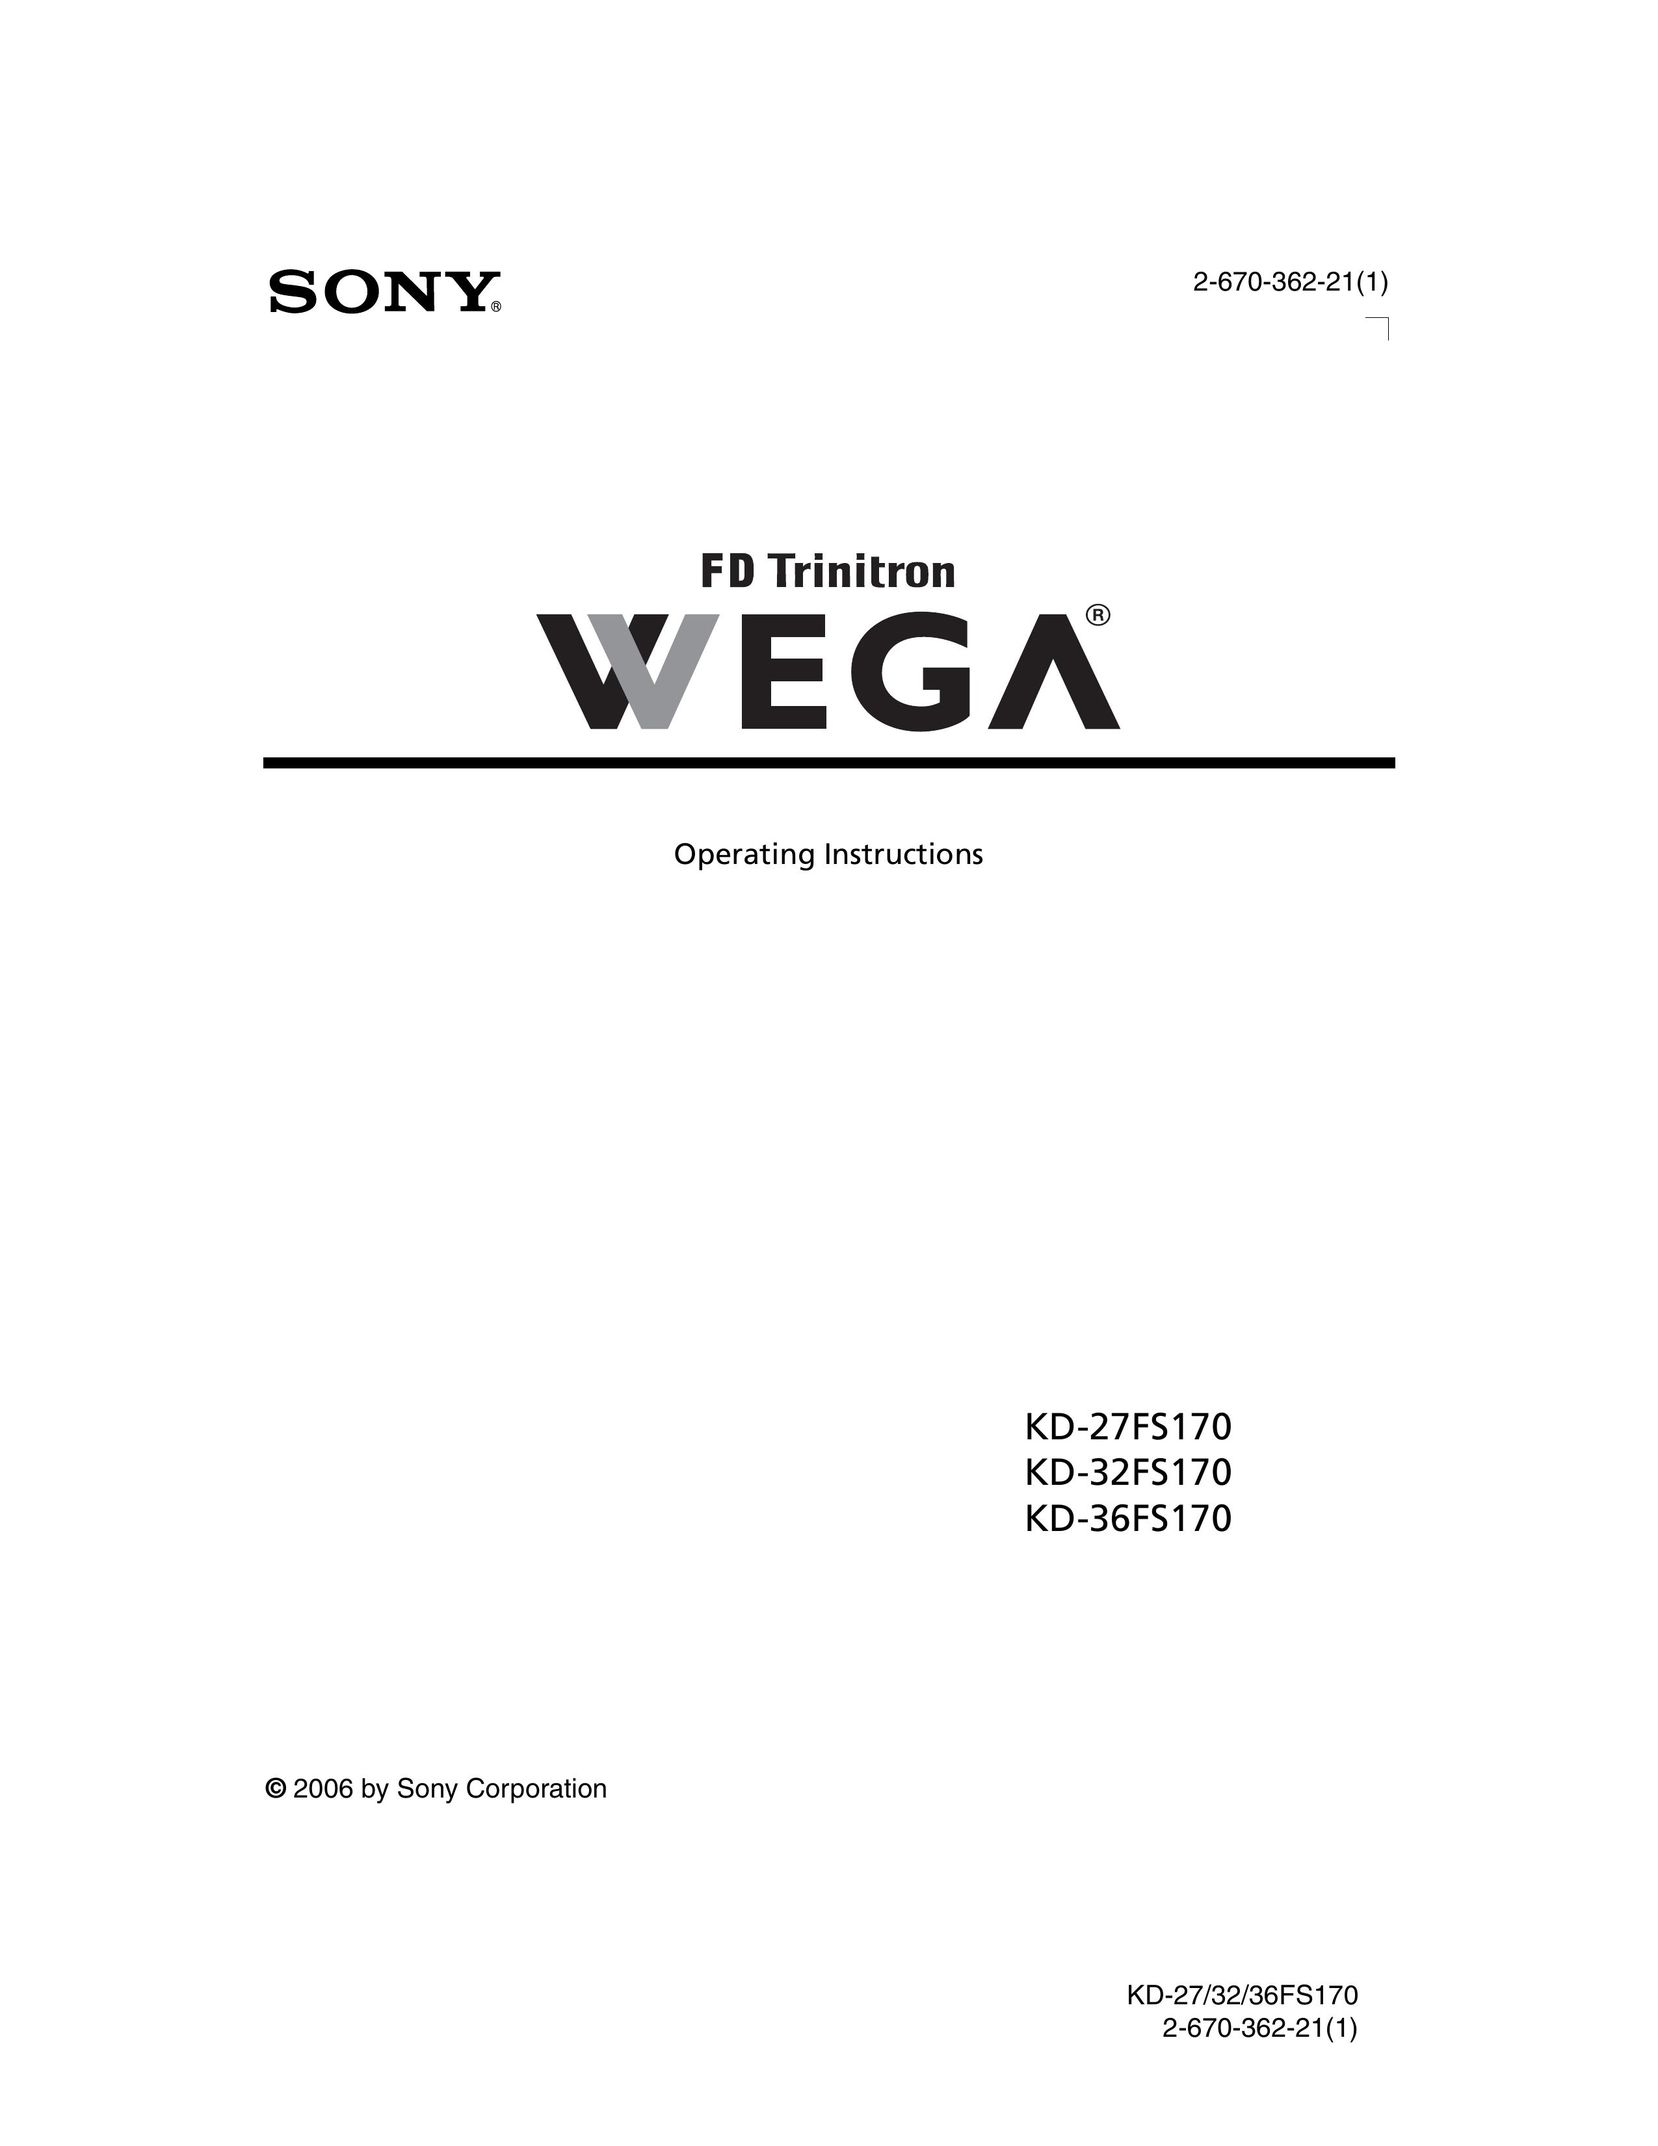 Sony KD 36FS170 CRT Television User Manual